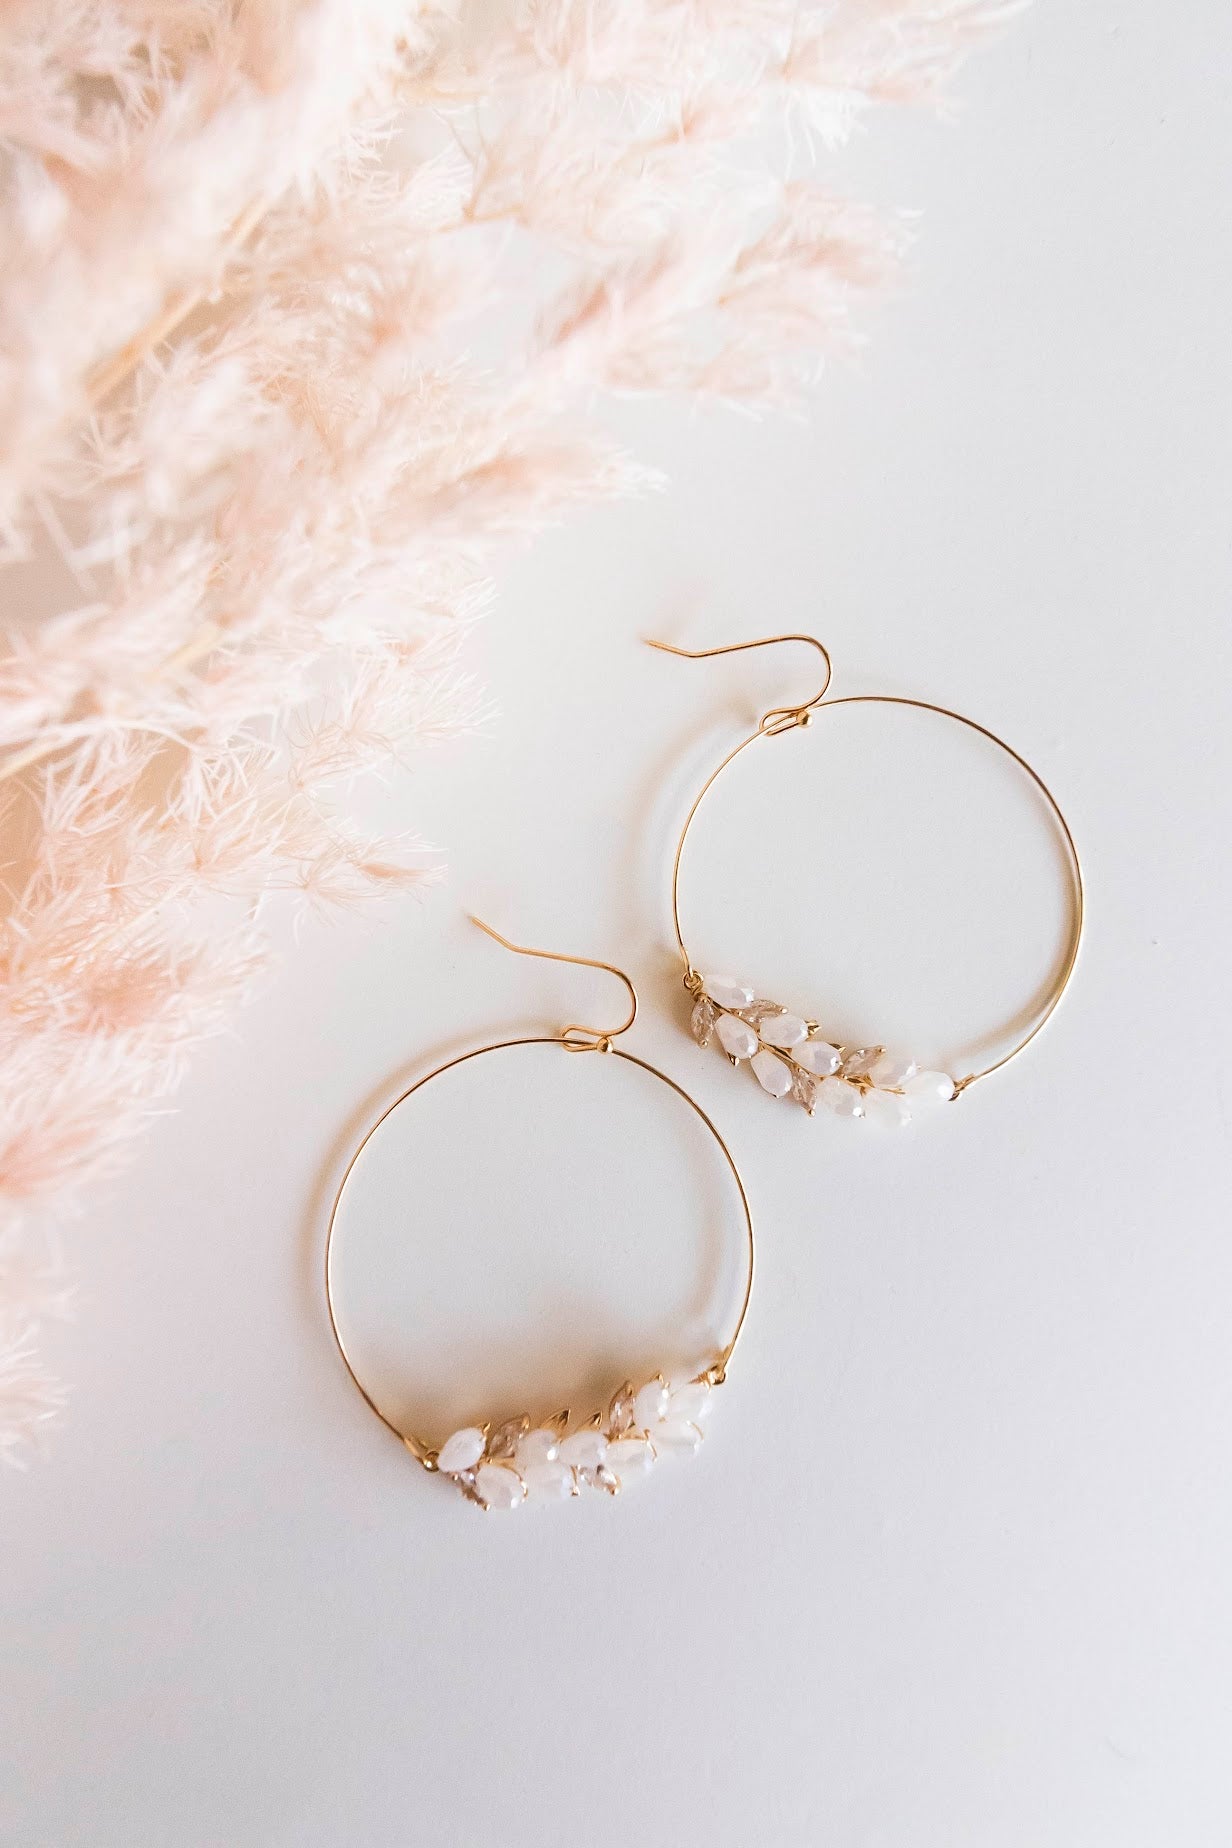 Emaline Blush Crystal Hoop Earrings | Thin Gold Hoops with Pastel Pink Crystals | Everyday and Special Occasion Accessories | Wedding Season Jewelry